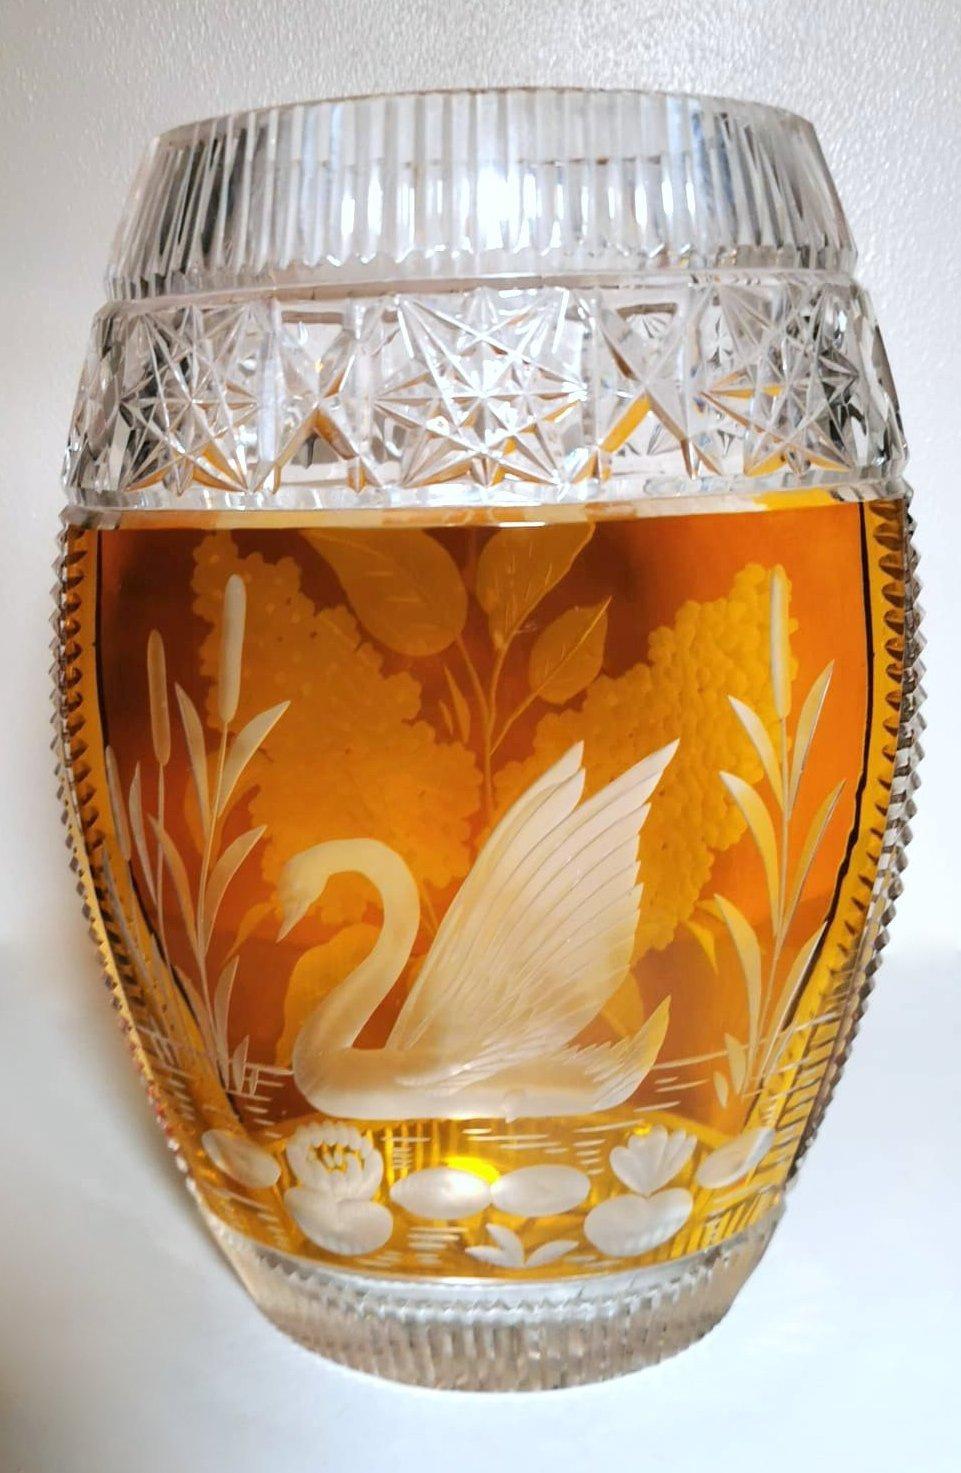 We kindly suggest you read the whole description, because with it we try to give you detailed technical and historical information to guarantee the authenticity of our objects.
Exceptional French crystal vase; the lenticular shape makes it unique